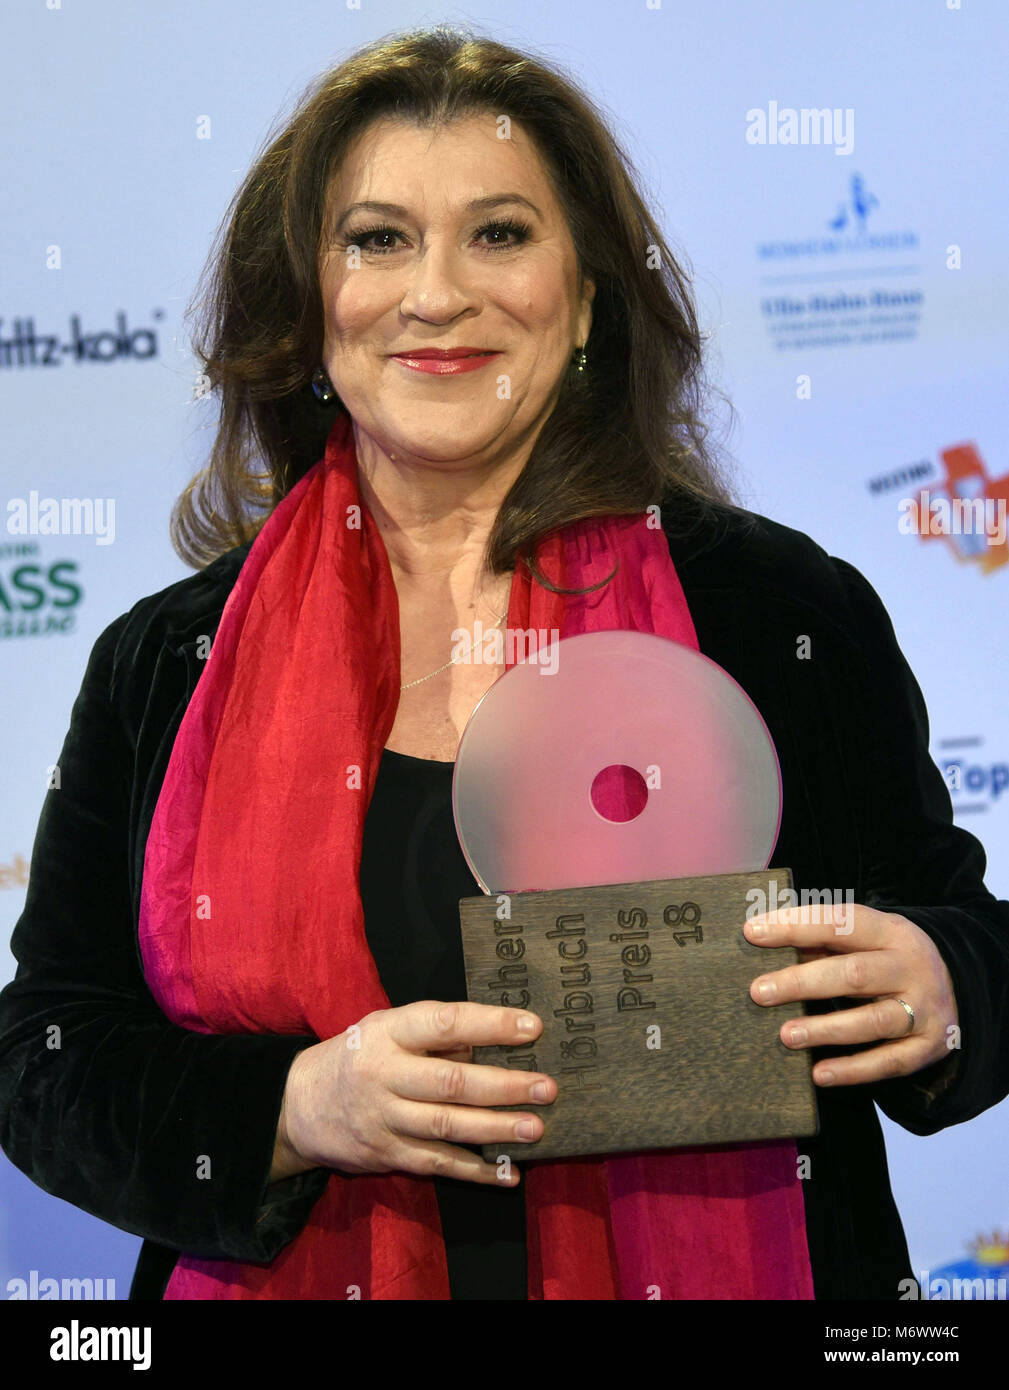 06 March 2018, Germany, Cologne: The actress Eva Mattes holding the 'special award' during a photo session before the award ceremony of the German audiobook awards. The ceremony also kickstarts the literature festival Lit.Cologne. Photo: Henning Kaiser/dpa Stock Photo